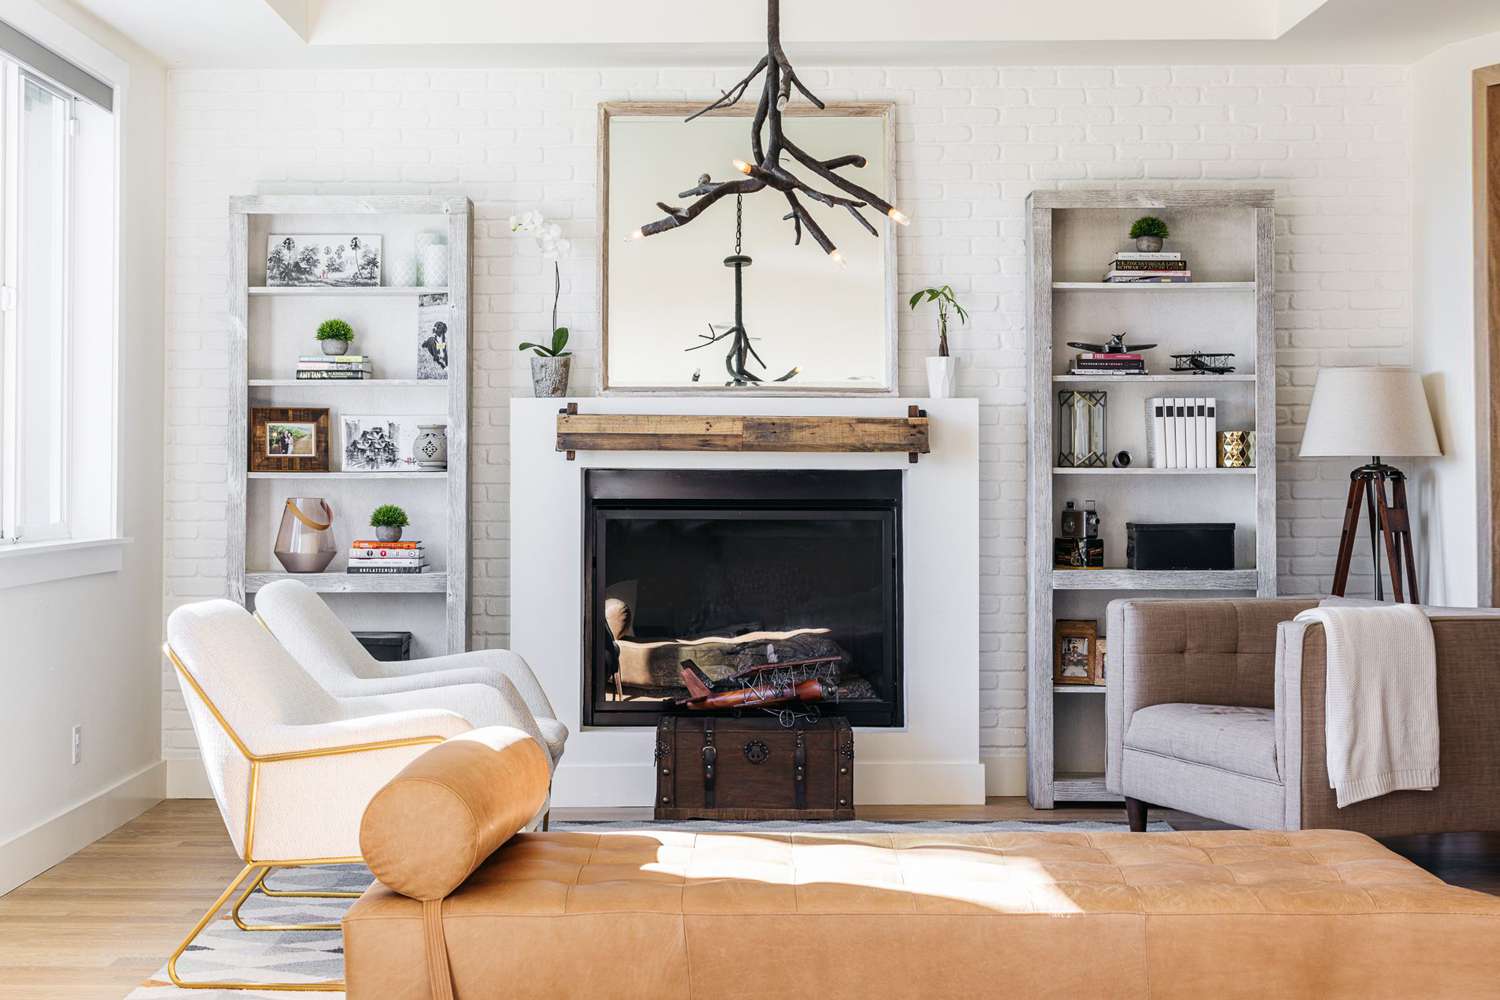 10 Living Room Fireplace Ideas: From Style To Placement